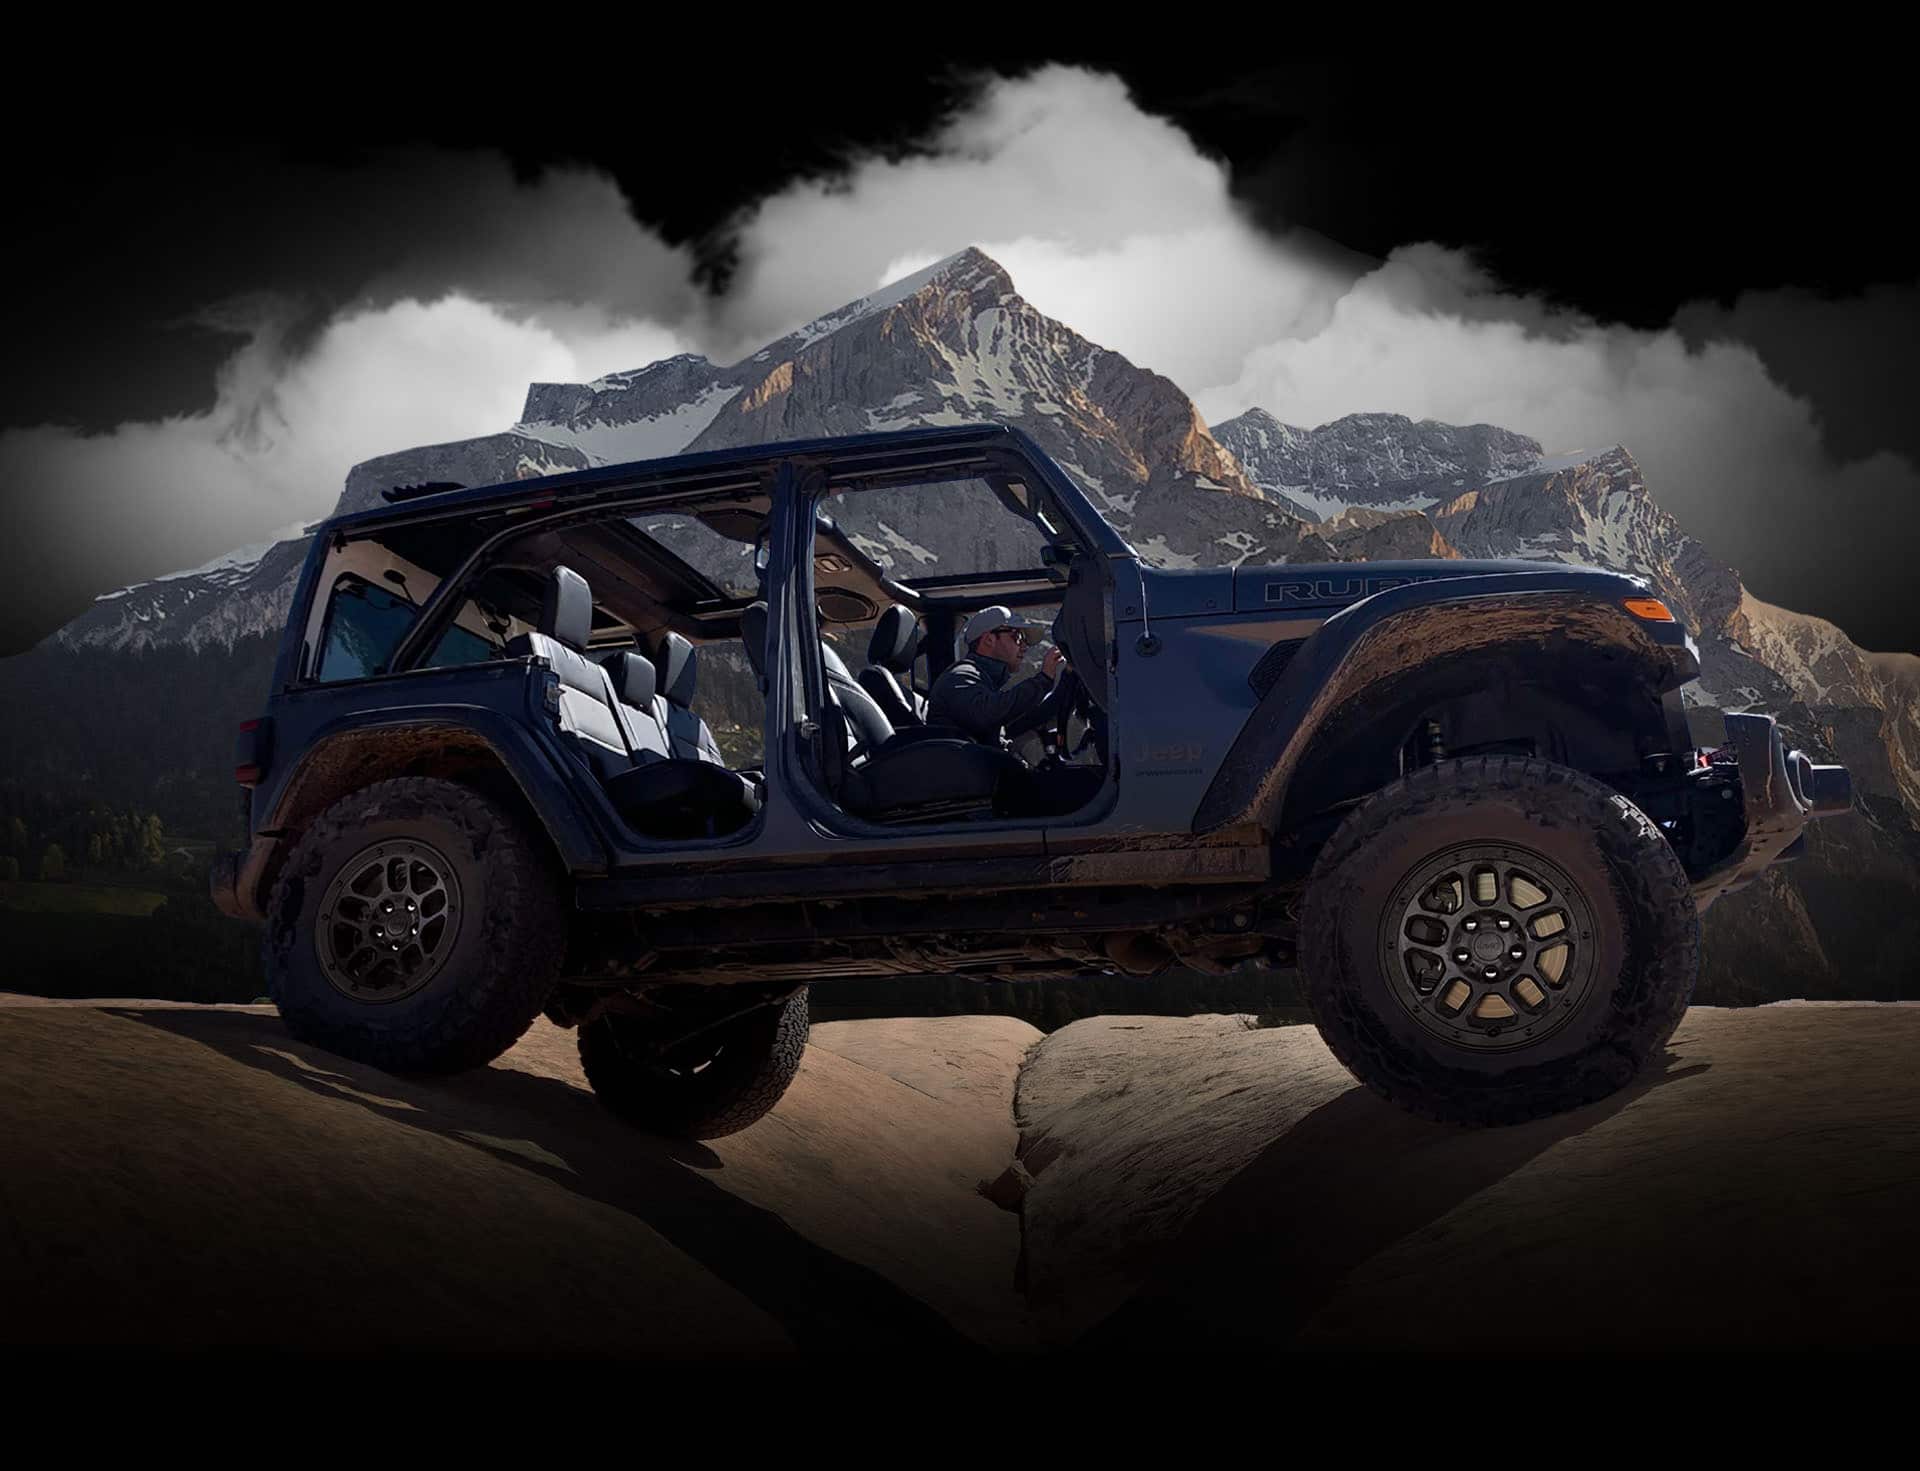 The 2023 Jeep Wrangler Rubicon 392 straddling two boulders as it's driven off-road with its doors off and top open.